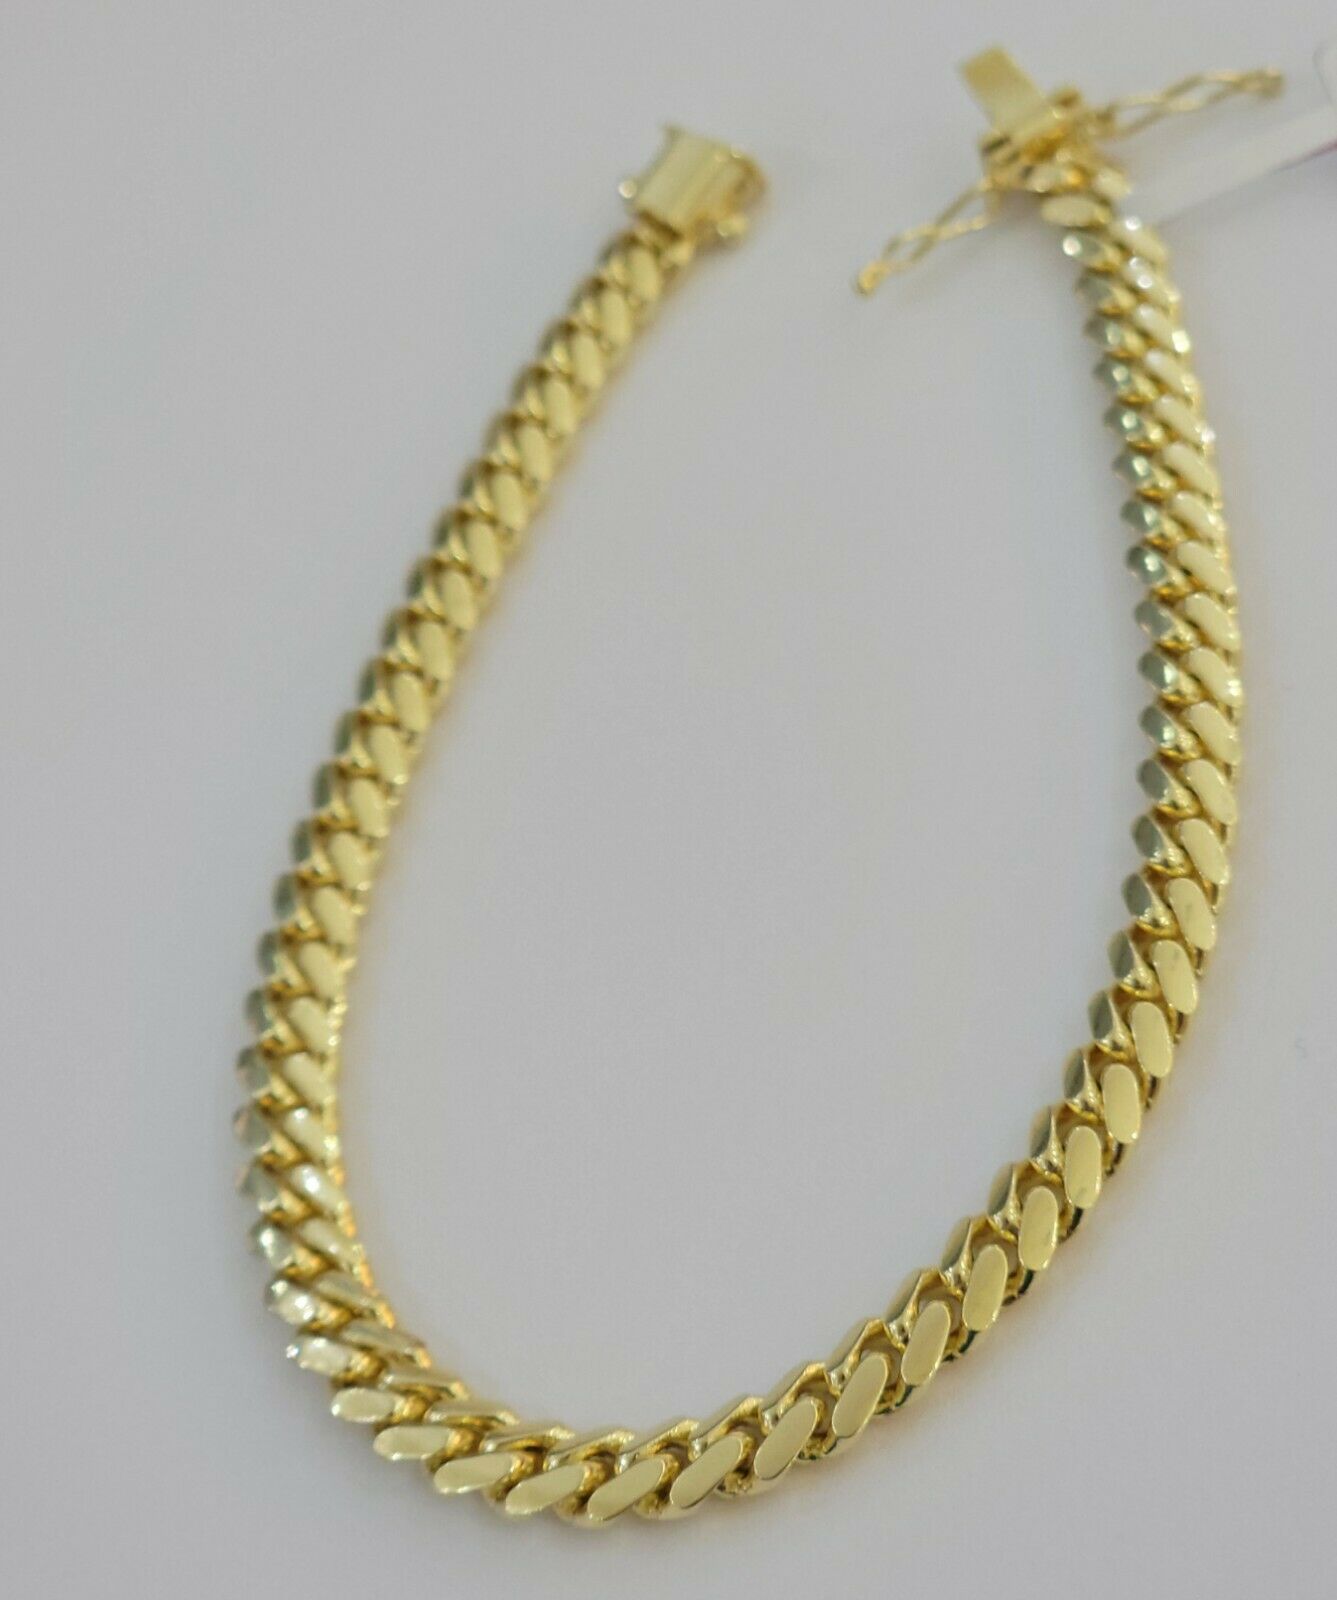 Real Gold maimi cuban Link Ladies bracelet 7Inch 6mm Real 10kt yellow Gold Women